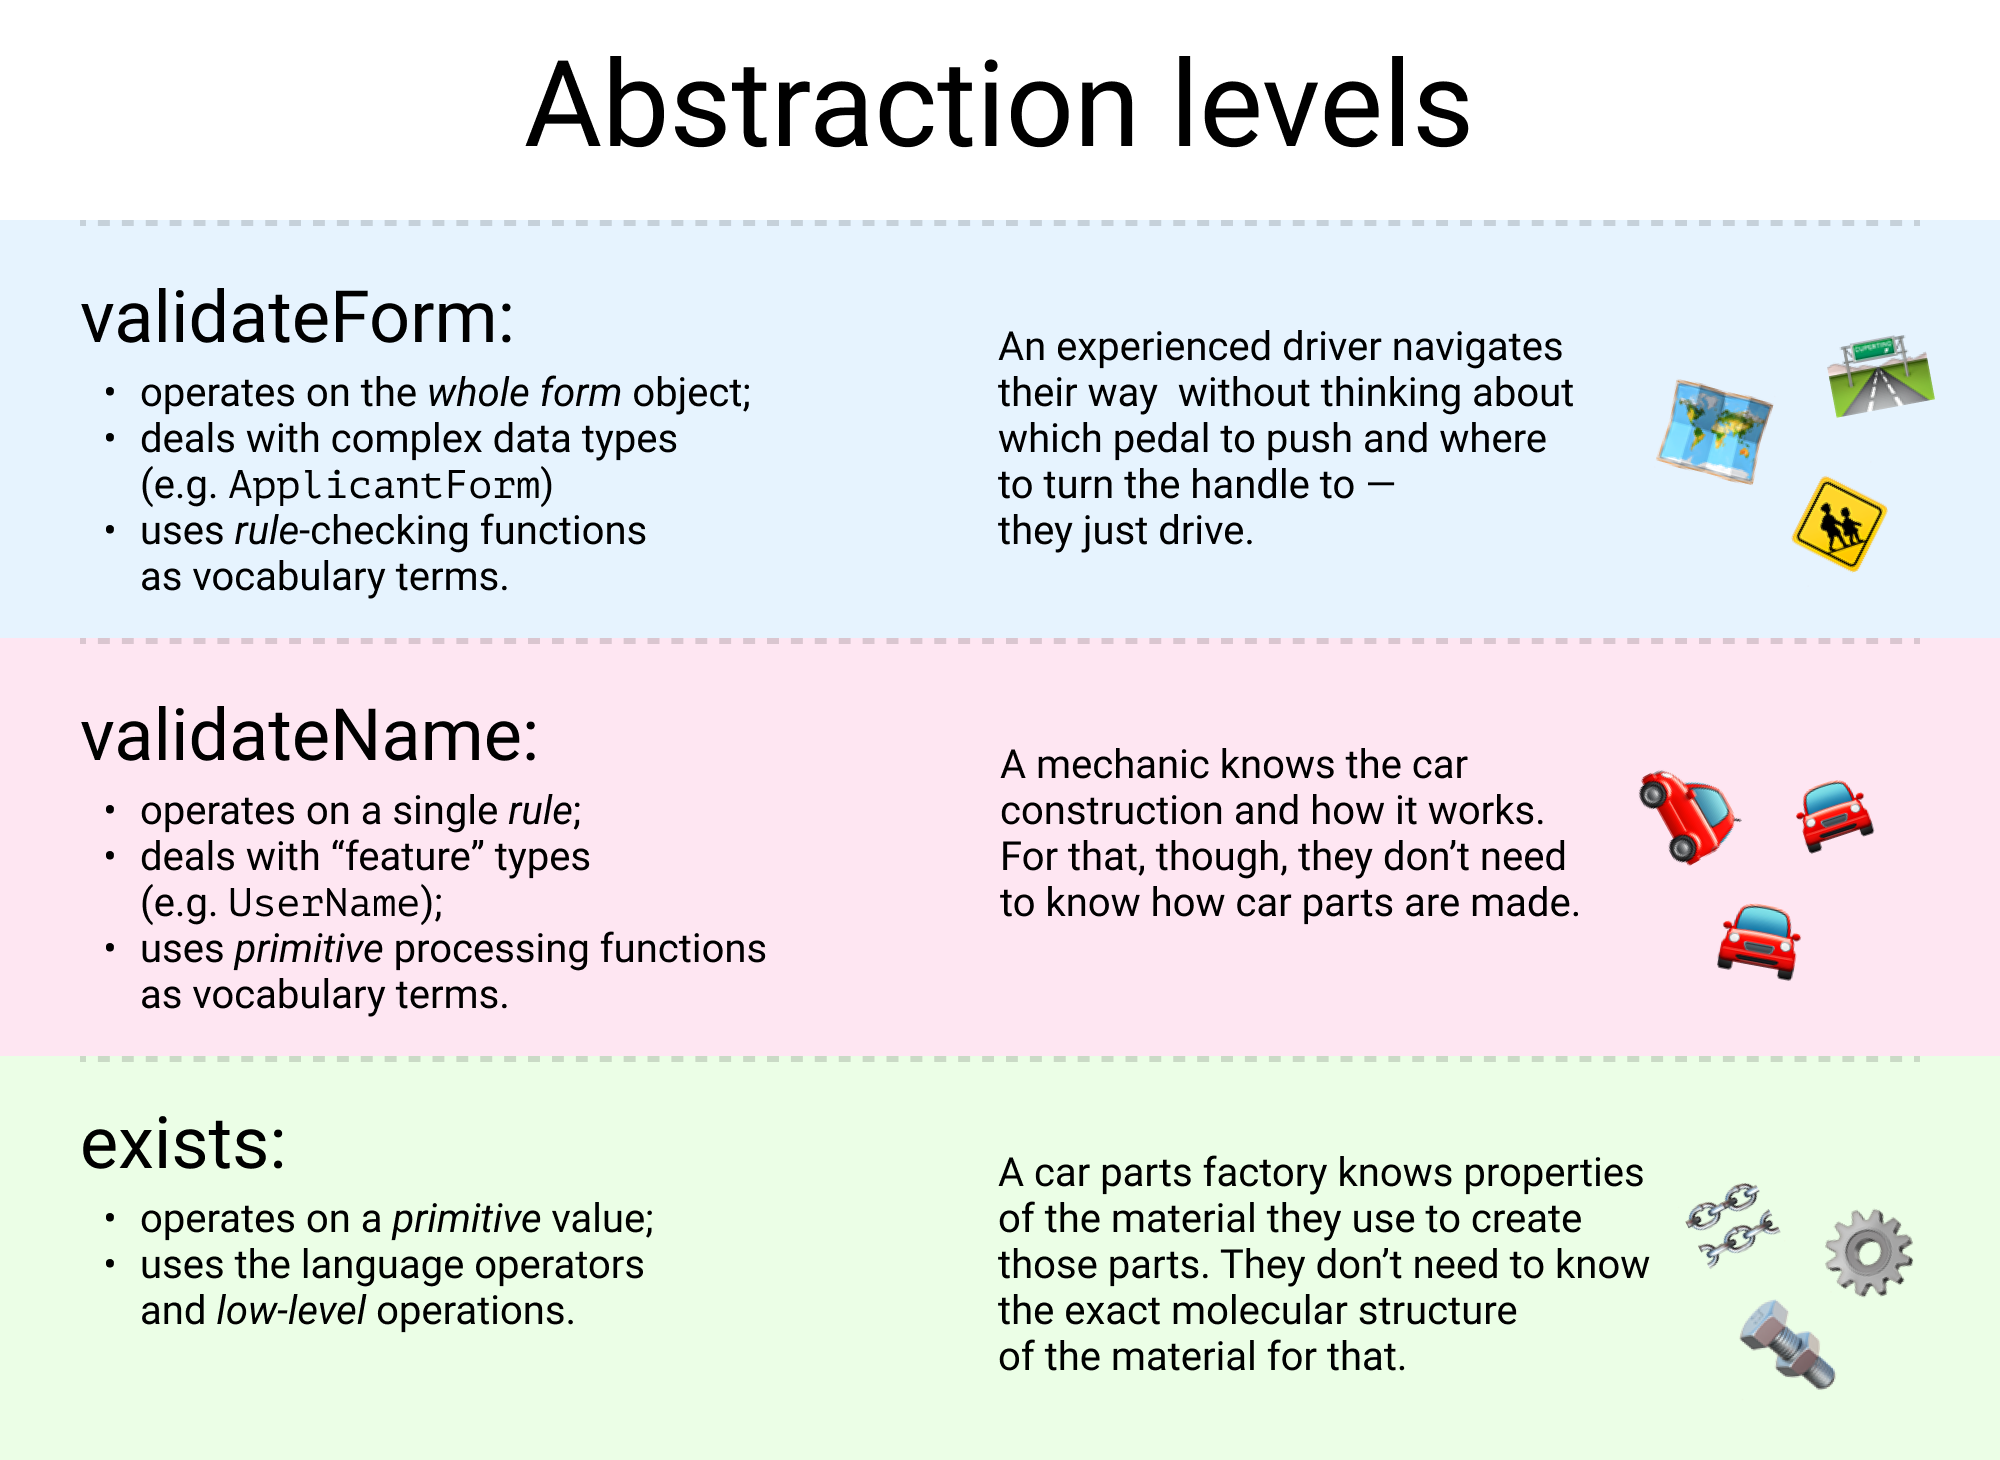 Abstraction helps to work with complex concepts